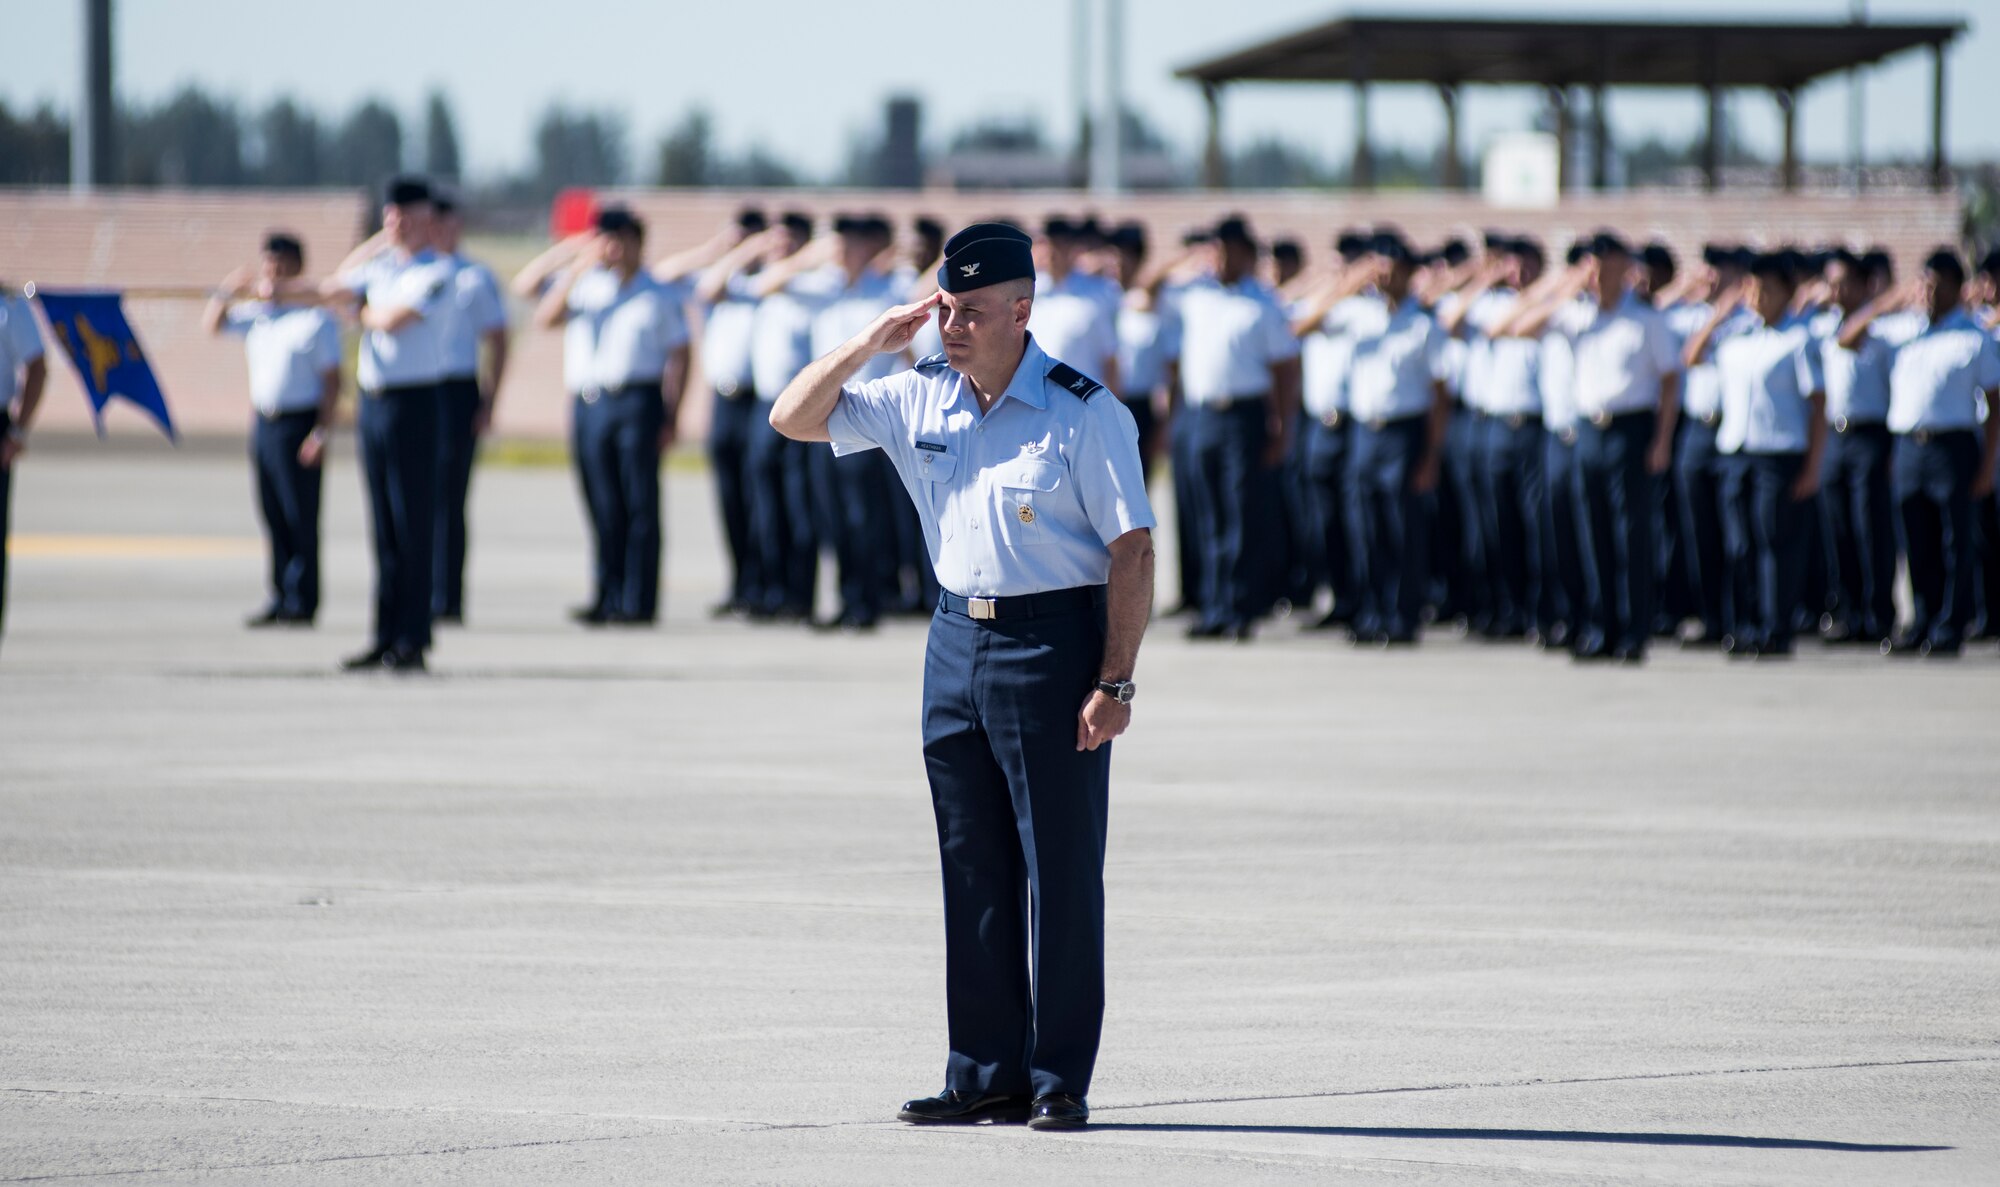 Col. J. Scot Heathman, 92nd Air Refueling Wing vice commander, leads the first salute from Team Fairchild during an assumption of command ceremony June 15, 2018, at Fairchild Air Force Base, Wash. Team Fairchild and the Inland Northwest community came together to welcome Col. Derek M. Salmi as he assumed command of the 92nd ARW. (U.S. Air Force photo/ Senior Airman Sean Campbell)